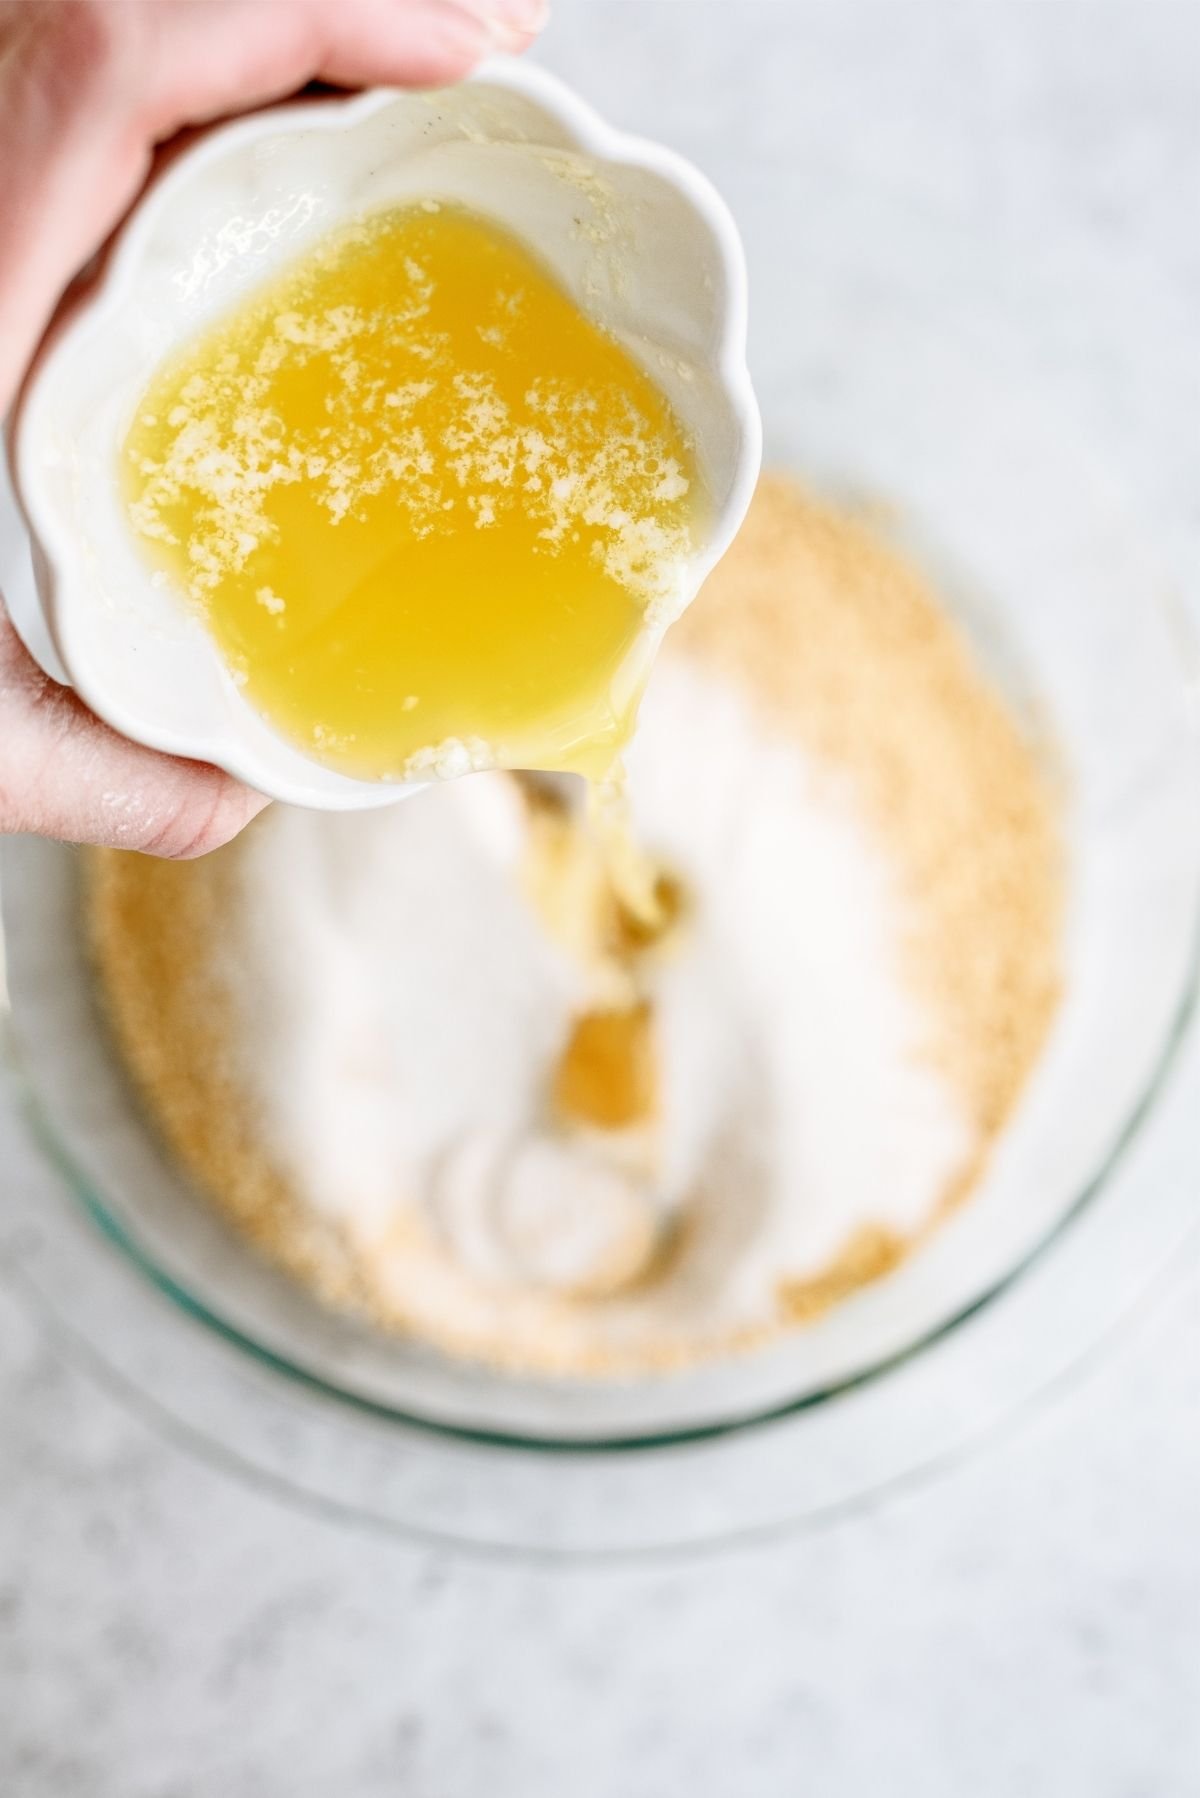 Graham cracker crumbs, sugar and melted butter in a glass bowl